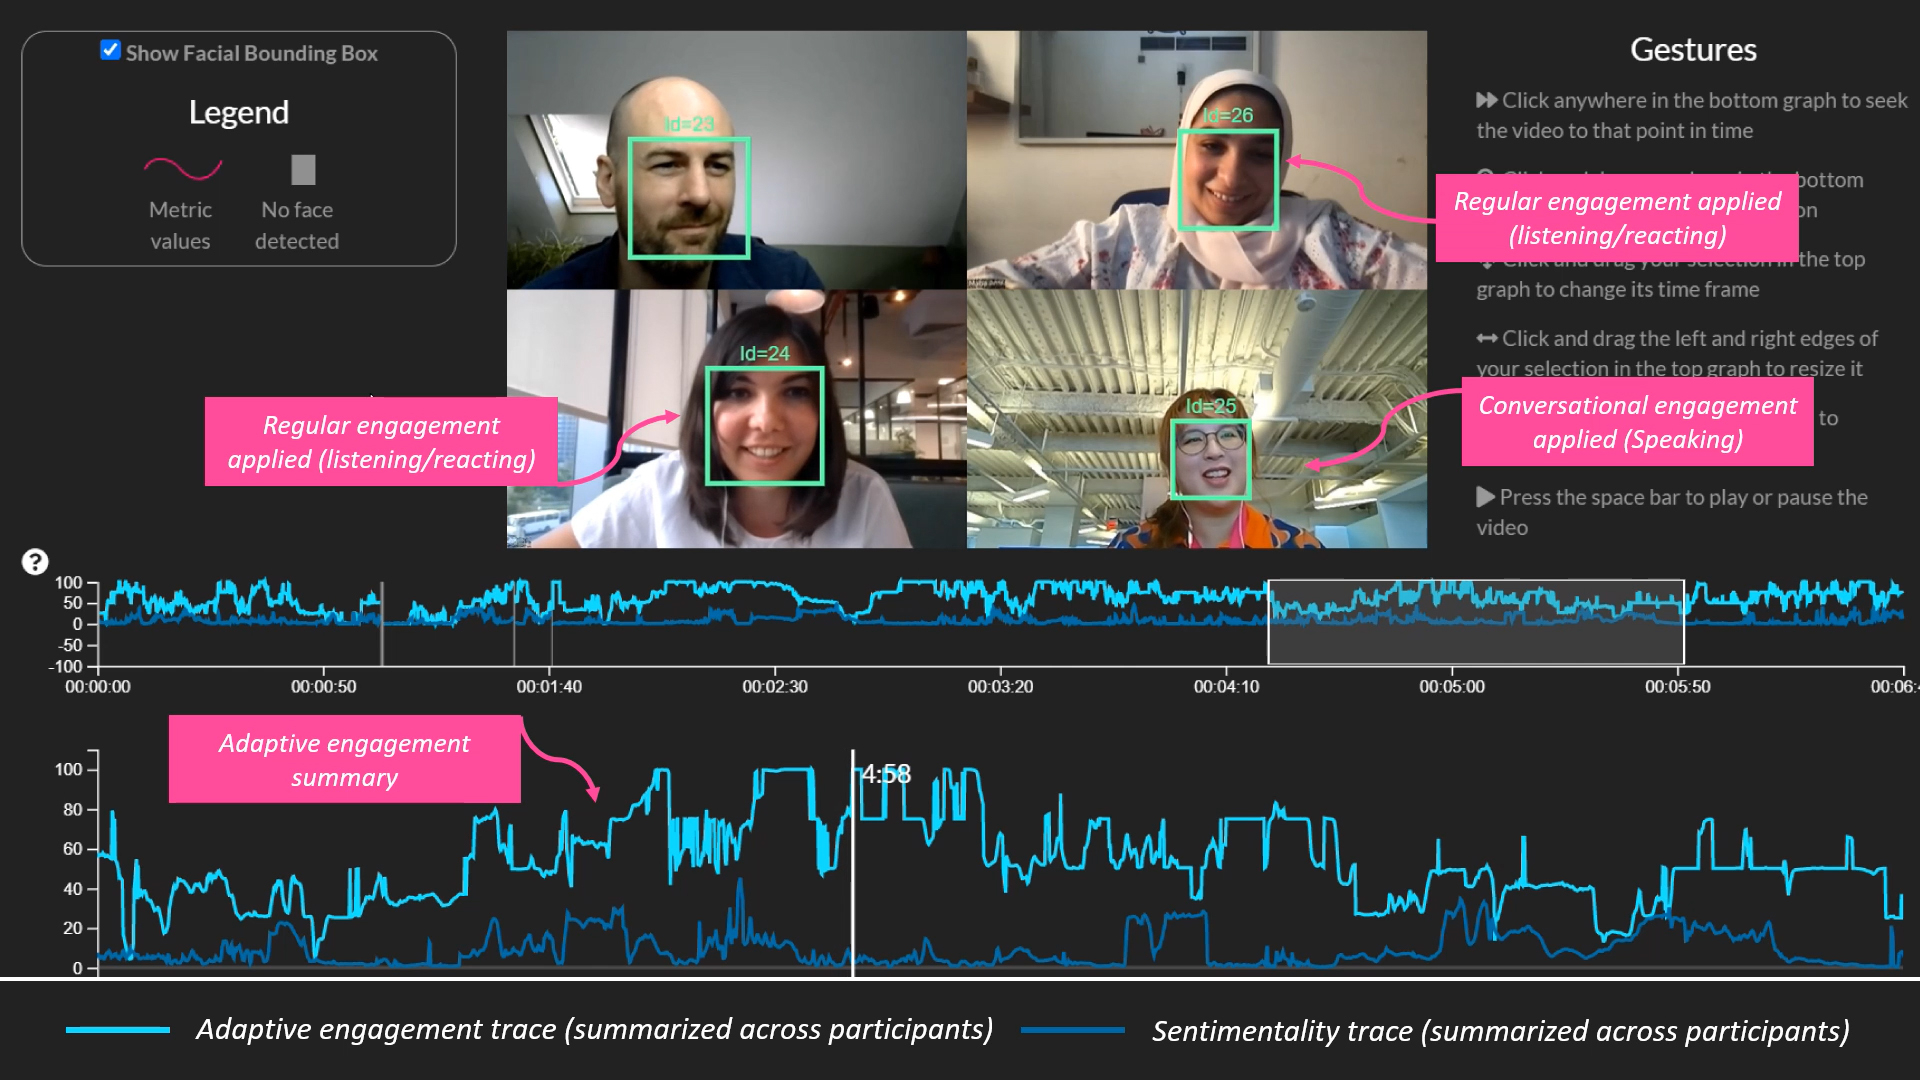 Smart Eye extends the use of Affectiva Emotion AI technology with new Conversational Engagement and Conversational Valence metrics that provide deeper insight into consumer responses using facial expression analysis in online qualitative research studies.